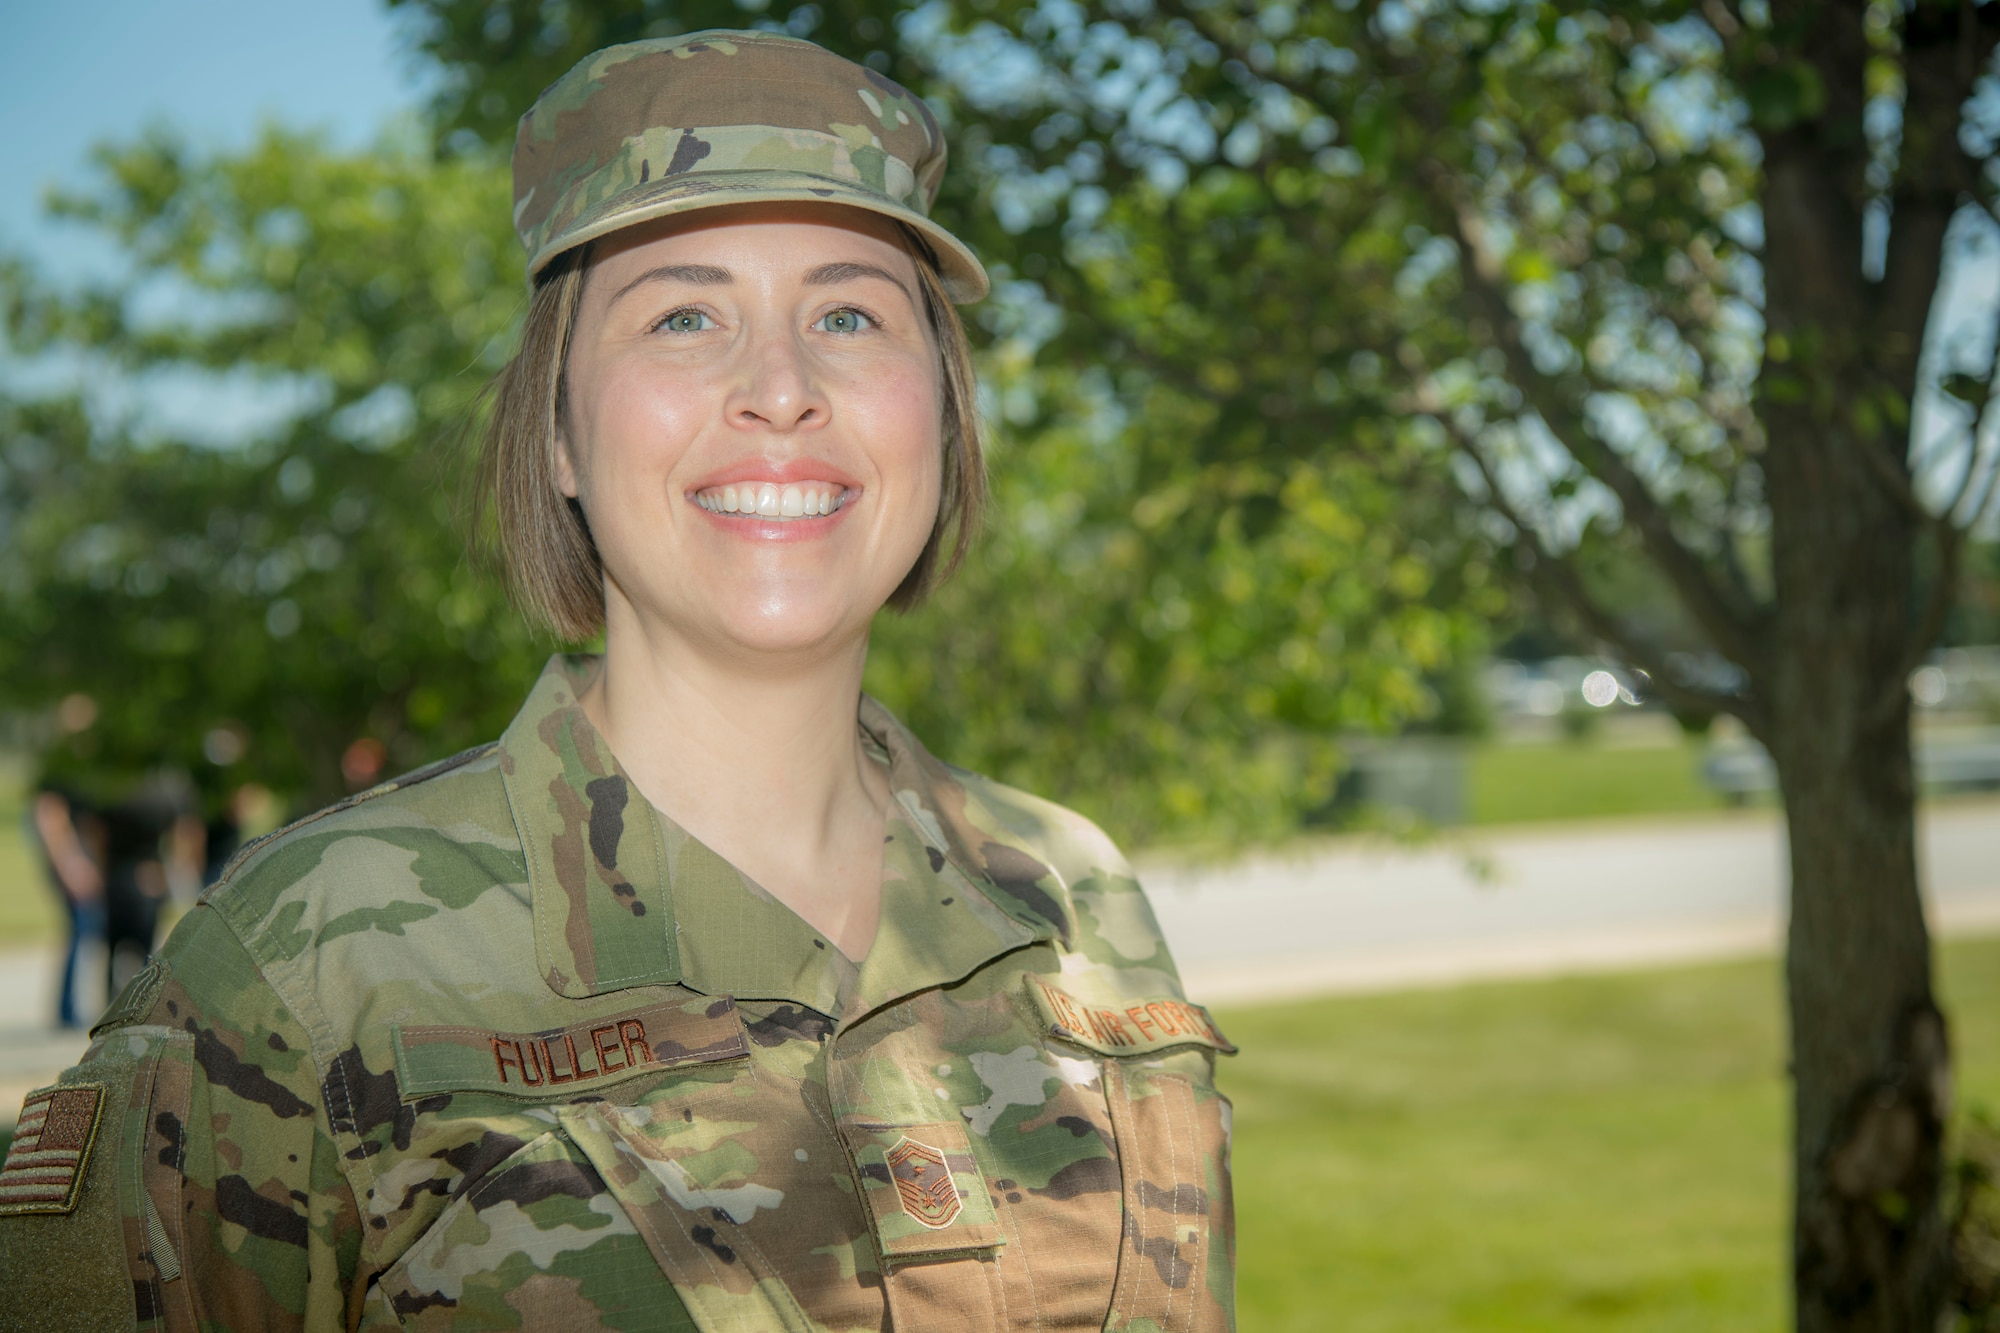 Senior Master Sgt. Shannon Fuller, Civil Engineering first sergeant, poses for a portrait outside of the 434th Air Refueling Wing headquarters, June 5, 2021, Grissom Air Reserve Base, Indiana. Fuller recently graduated from Ivy Tech Community College of Indiana and was the honoree of the Chancellor Award. (U.S. Air Force photo by SSgt. Alexa Culbert)